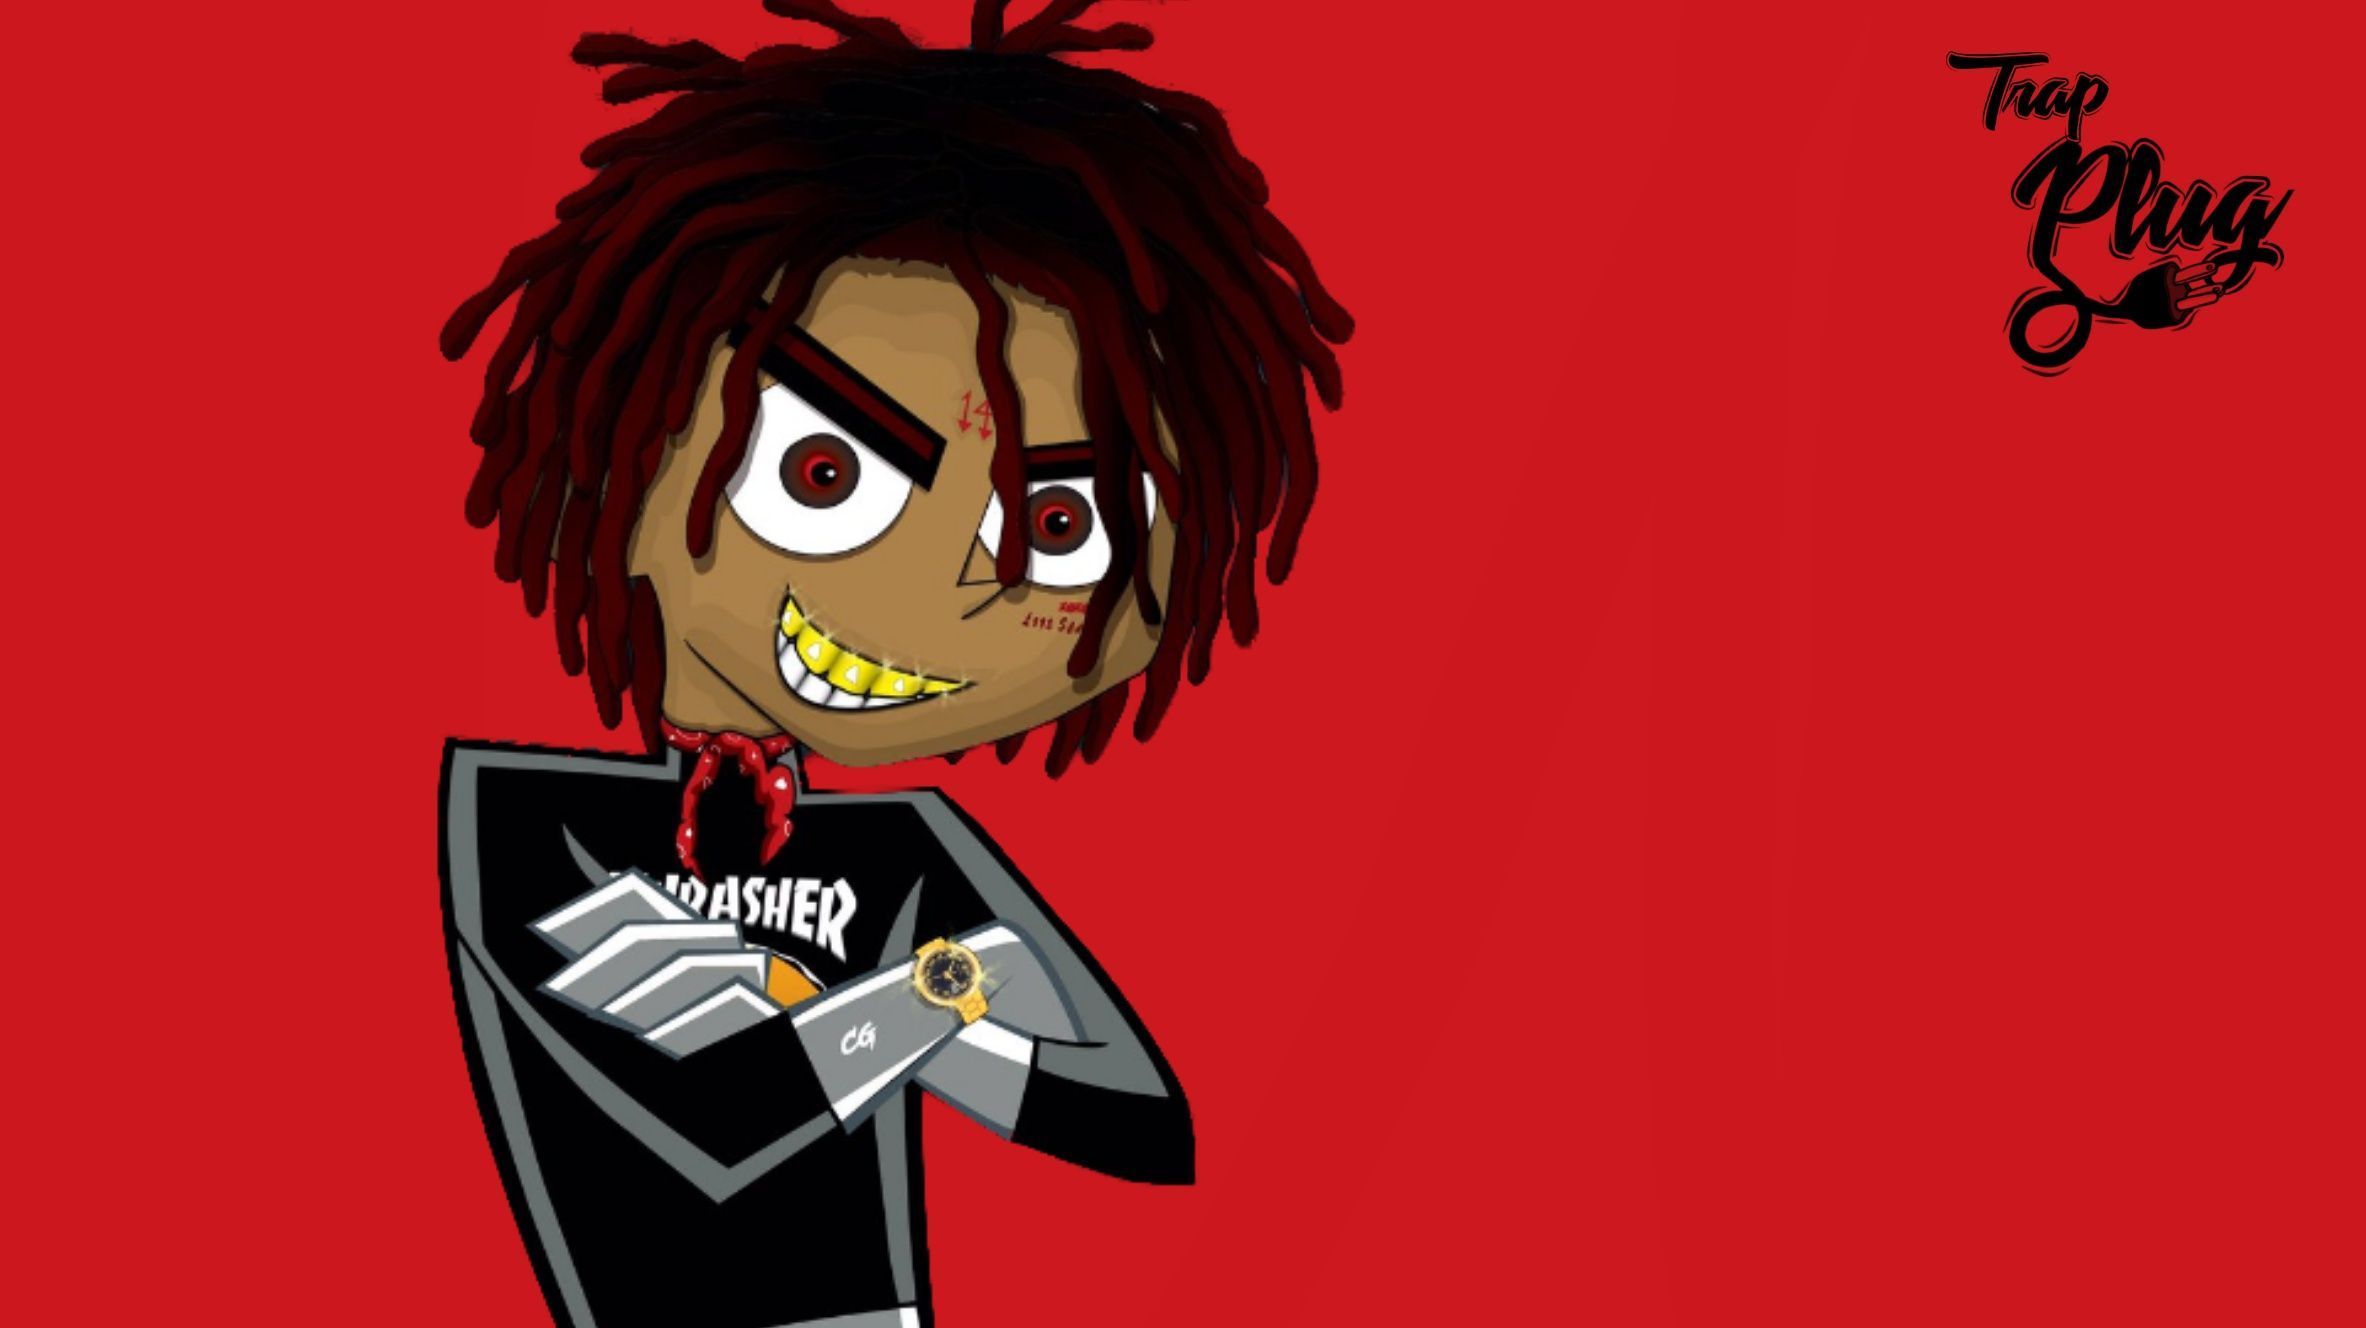 Cool Trippie Red Wallpaper On